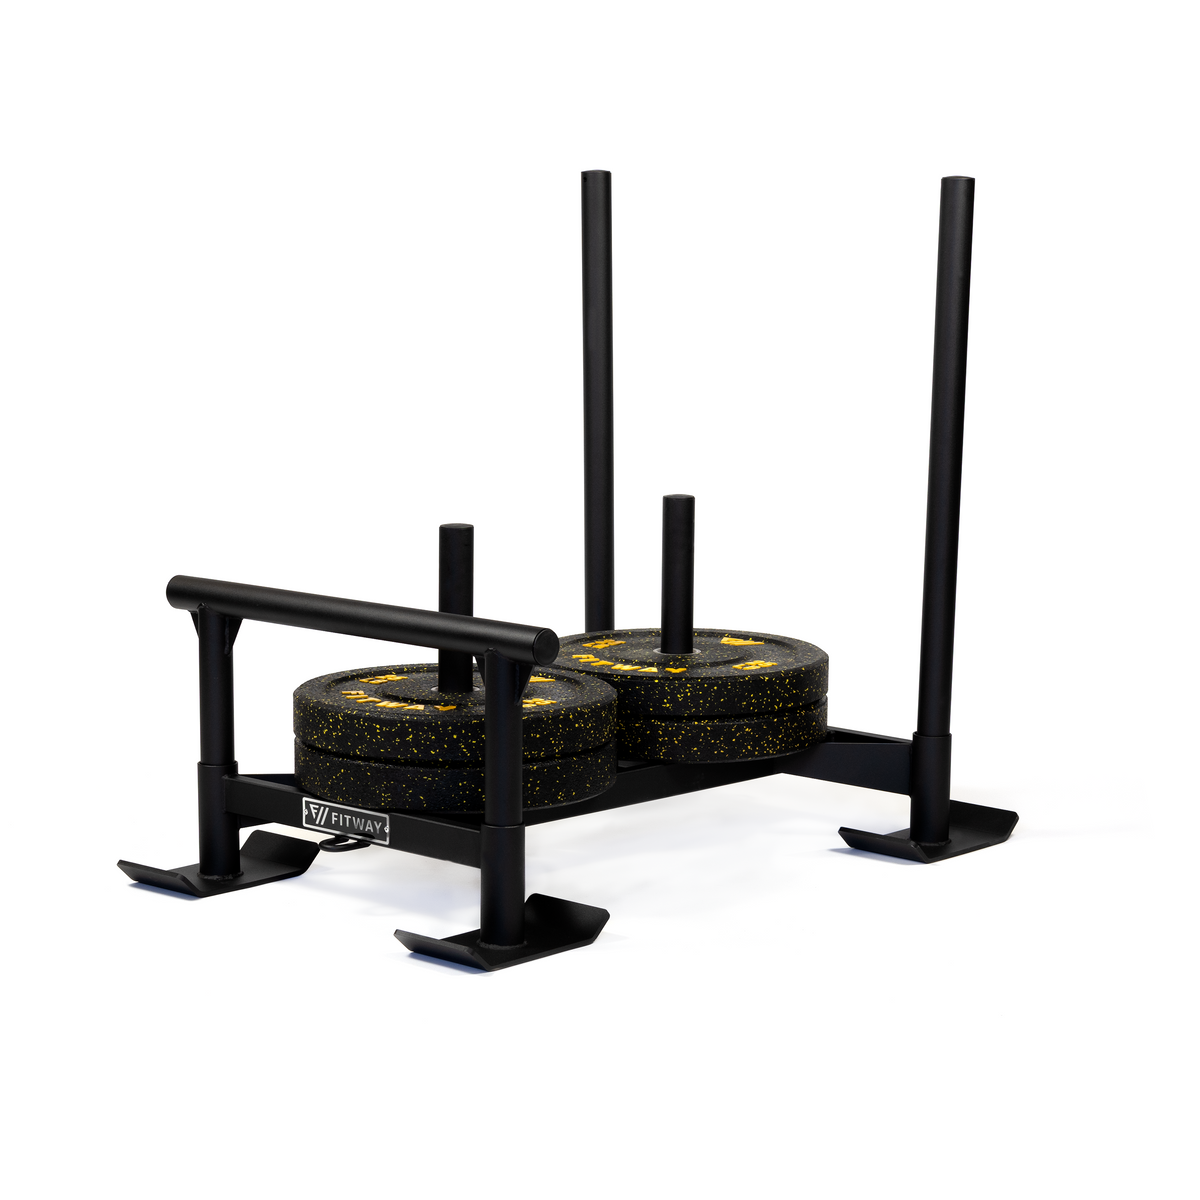 FitWay Equip. Power Sled - Black